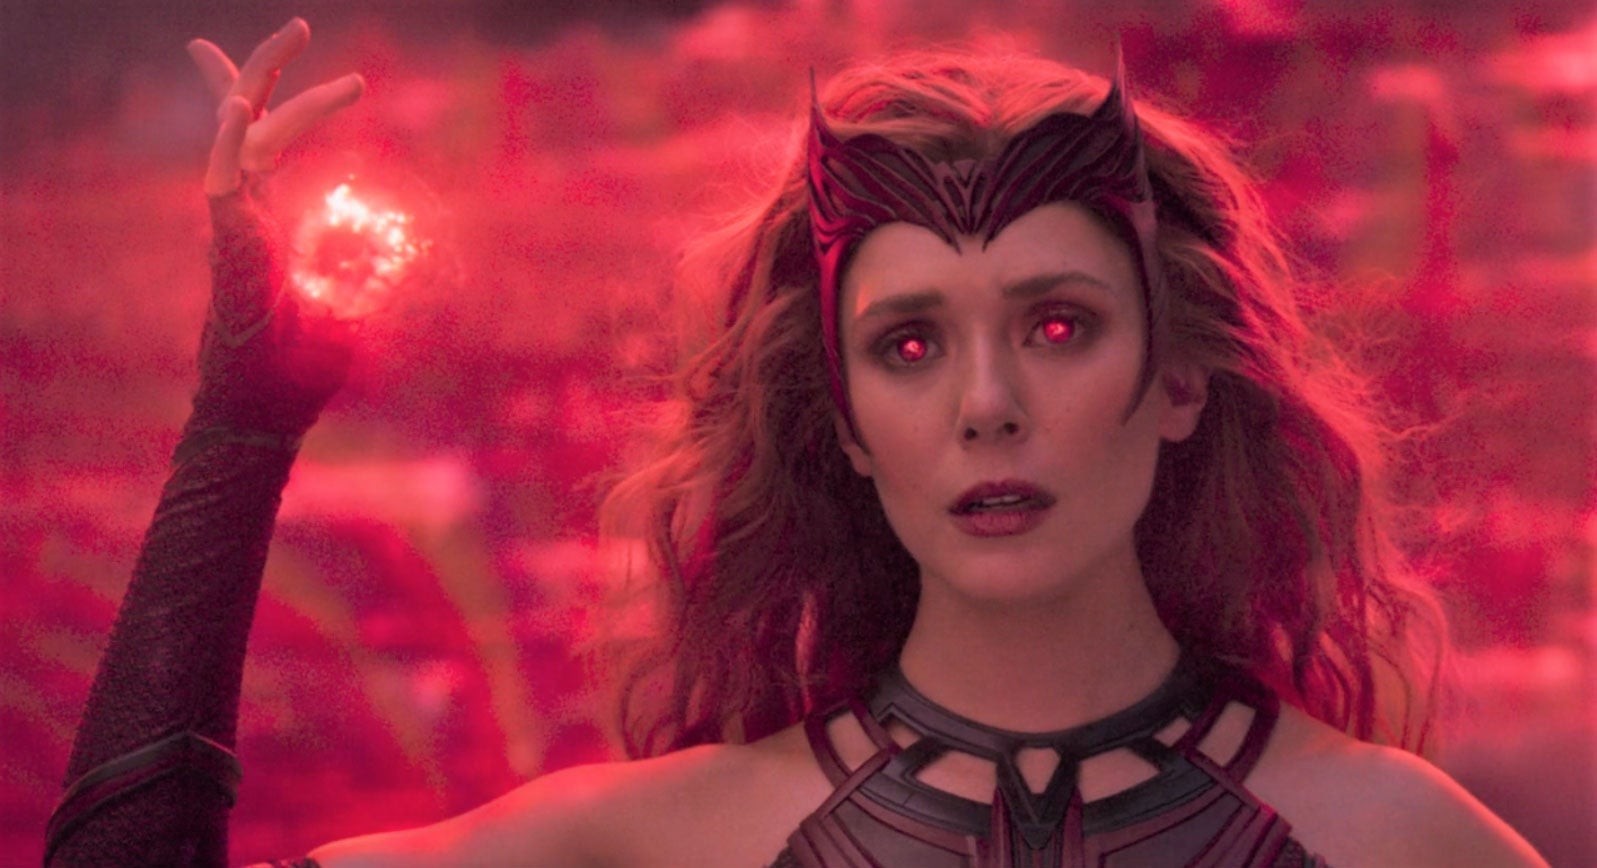 Scarlet Witch's powers were at their peak in Doctor Strange 2